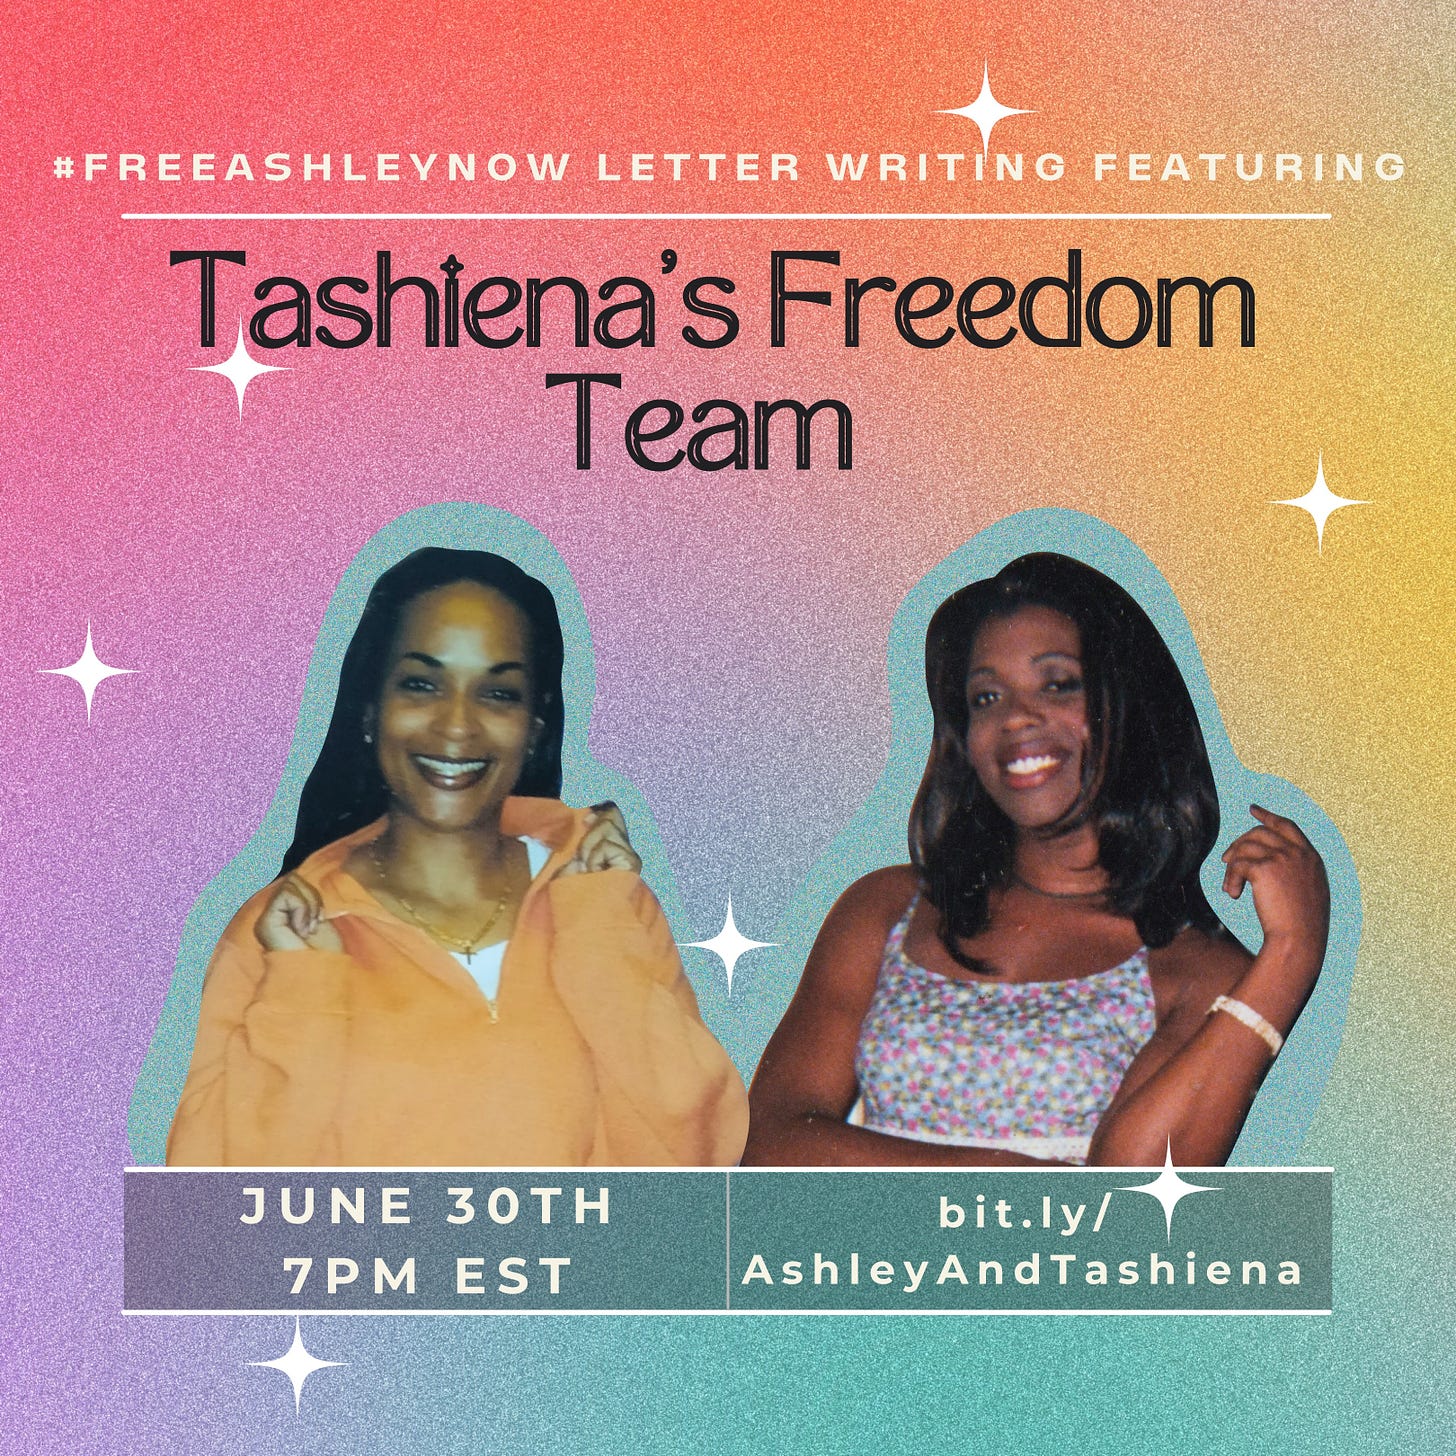 image id: grainy multicolored background with white stars. Text: #FreeAshleyNow Letter Writing featuring Tashiena's Freedom team. June 30th 7PM EST, bit.ly/AshleyAndTashiena. There are pictures of Tashiena and Ashley on a blue background. Tashiena is a Black woman smiling and wearing an orange sweater. Ashley is a Black trans woman smiling and wearing a dress.